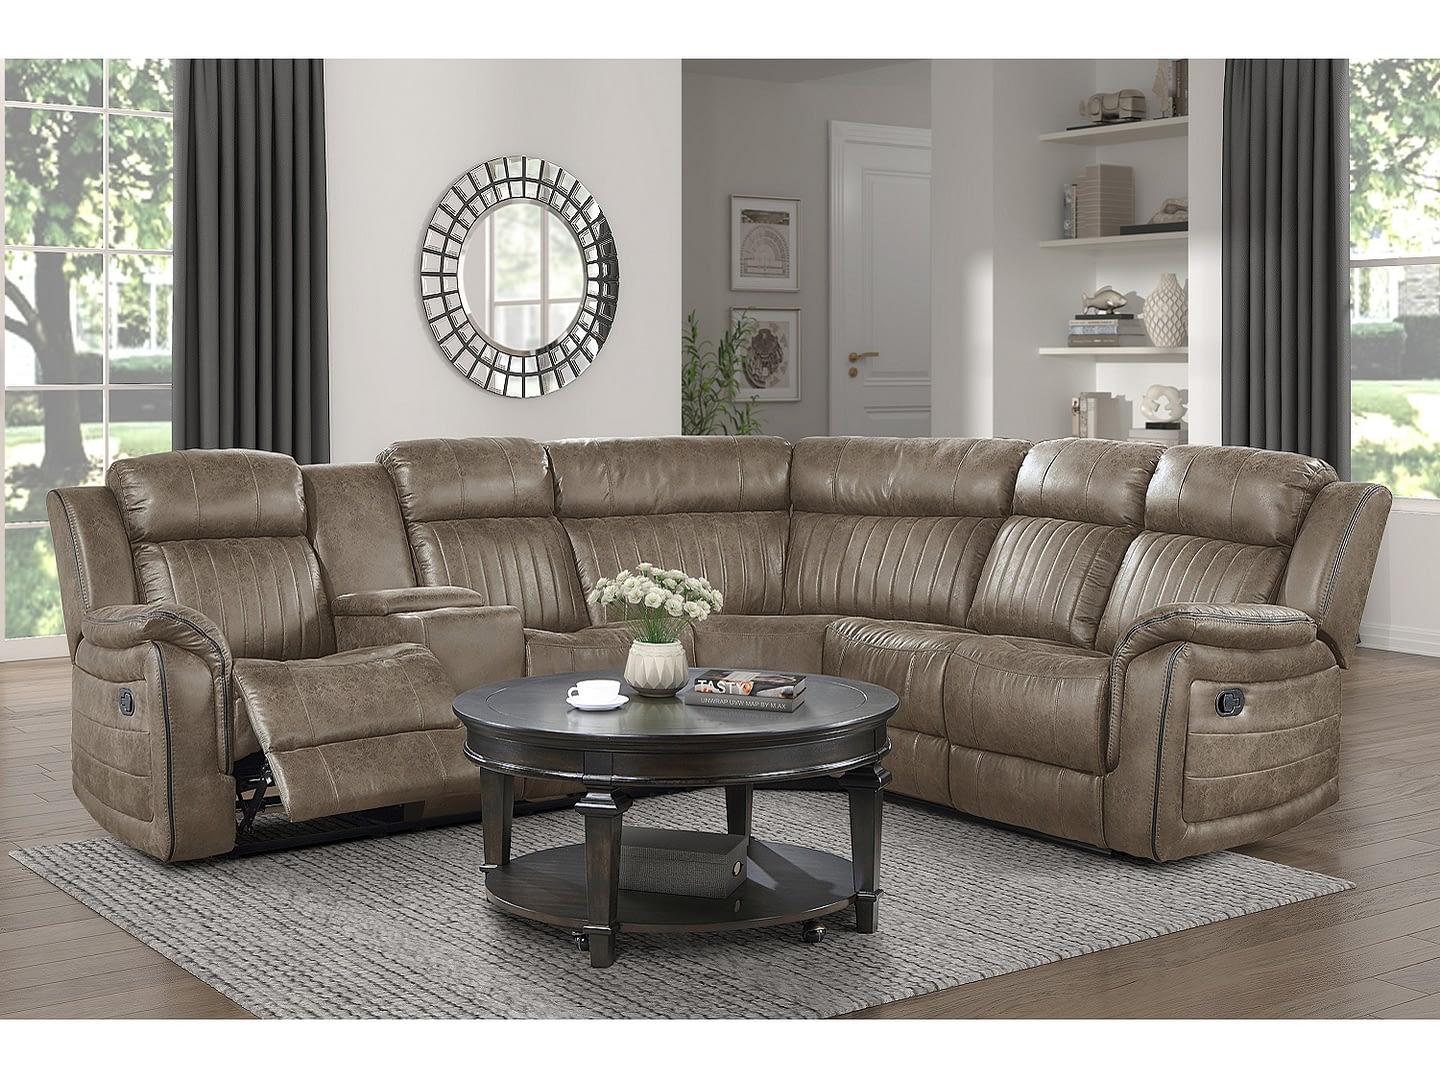 FERNLY Reclining Sectional with Console